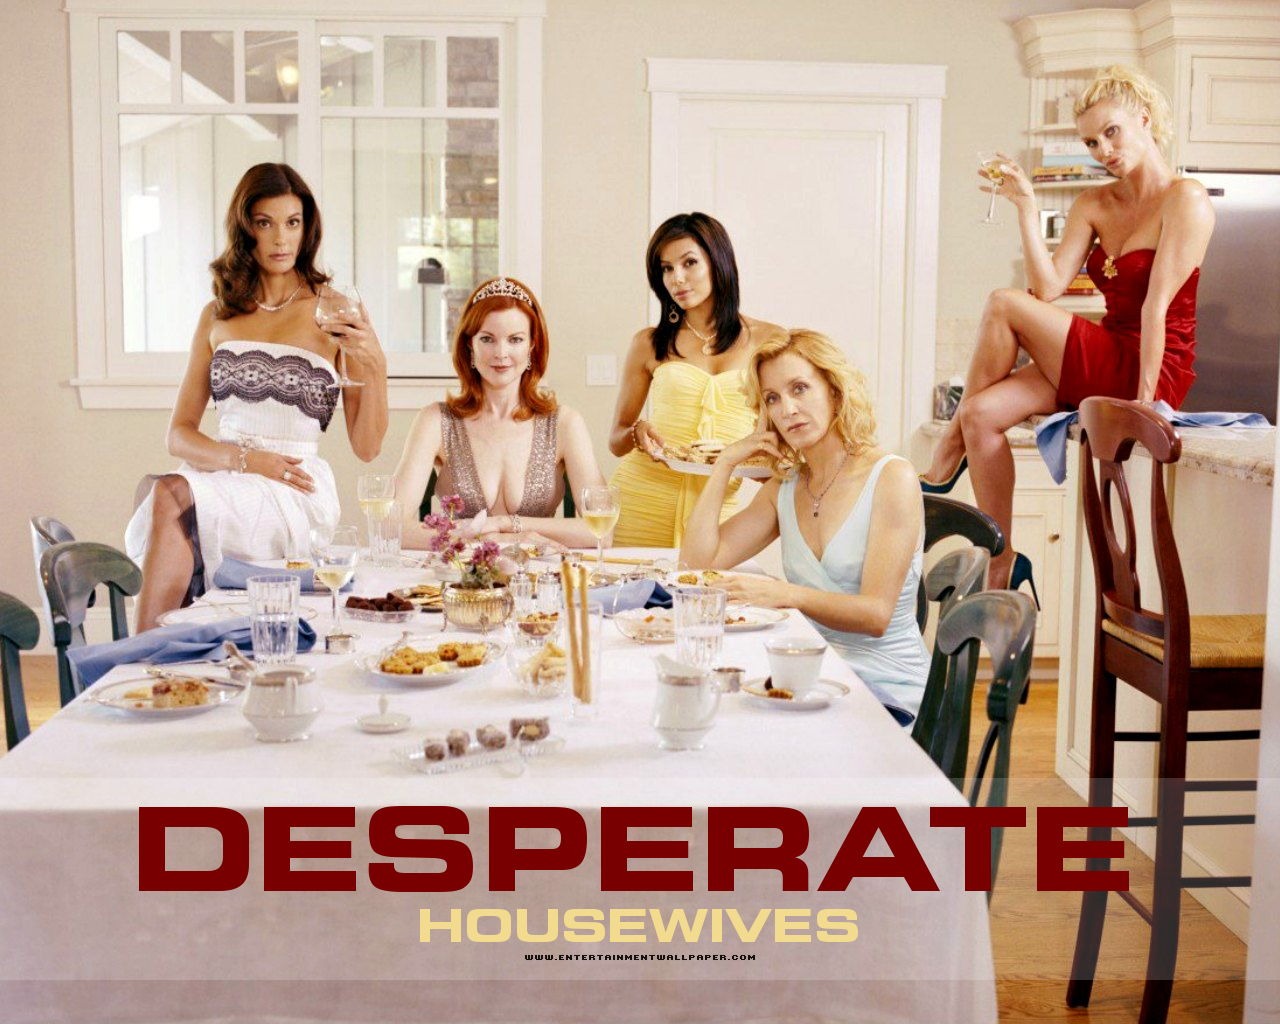 Desperate Housewives wallpaper #26 - 1280x1024